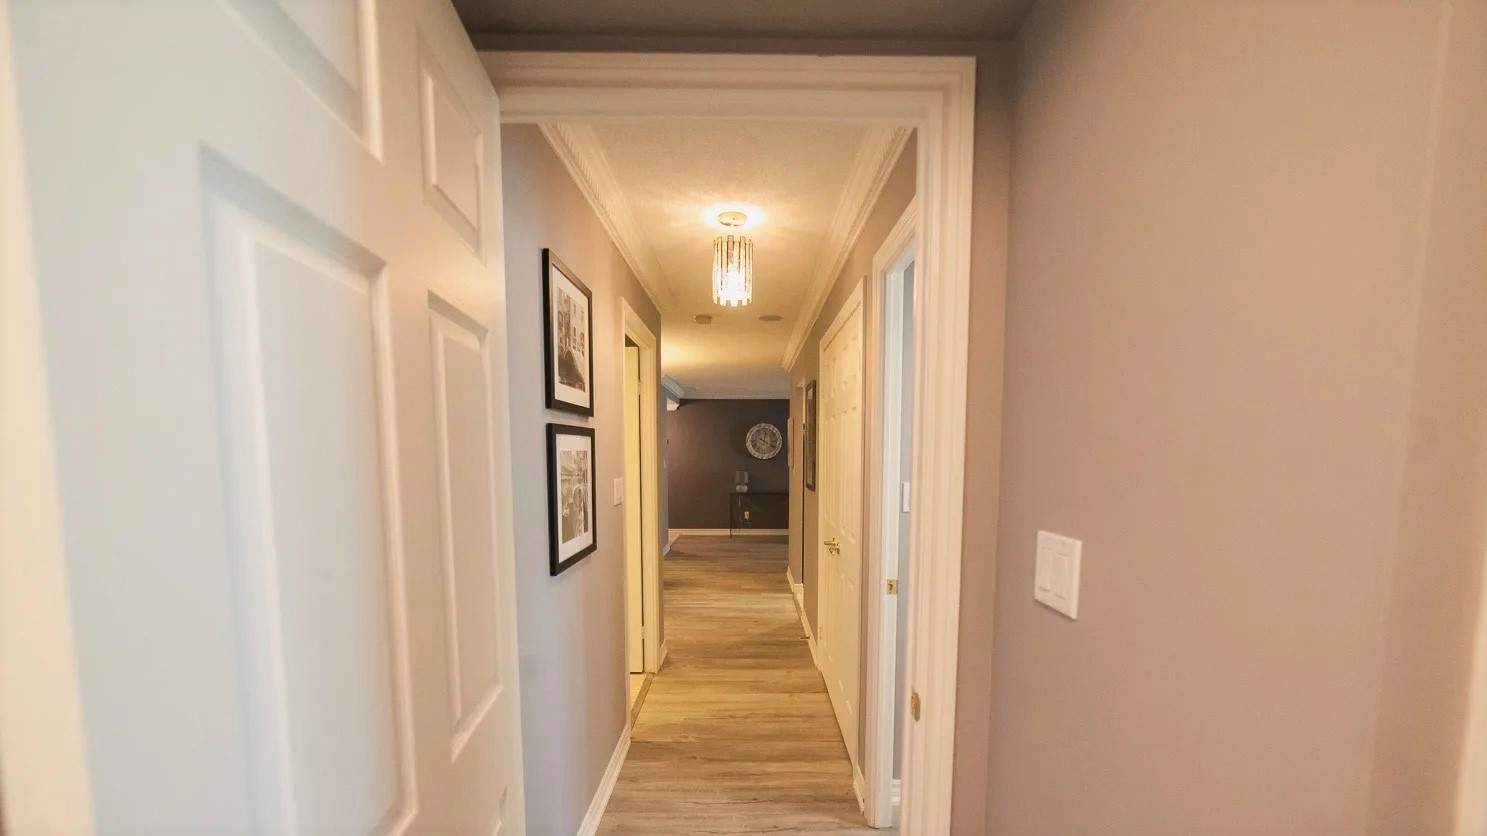 168 Simcoe foyer with new laminate floors and framed photos on walls.